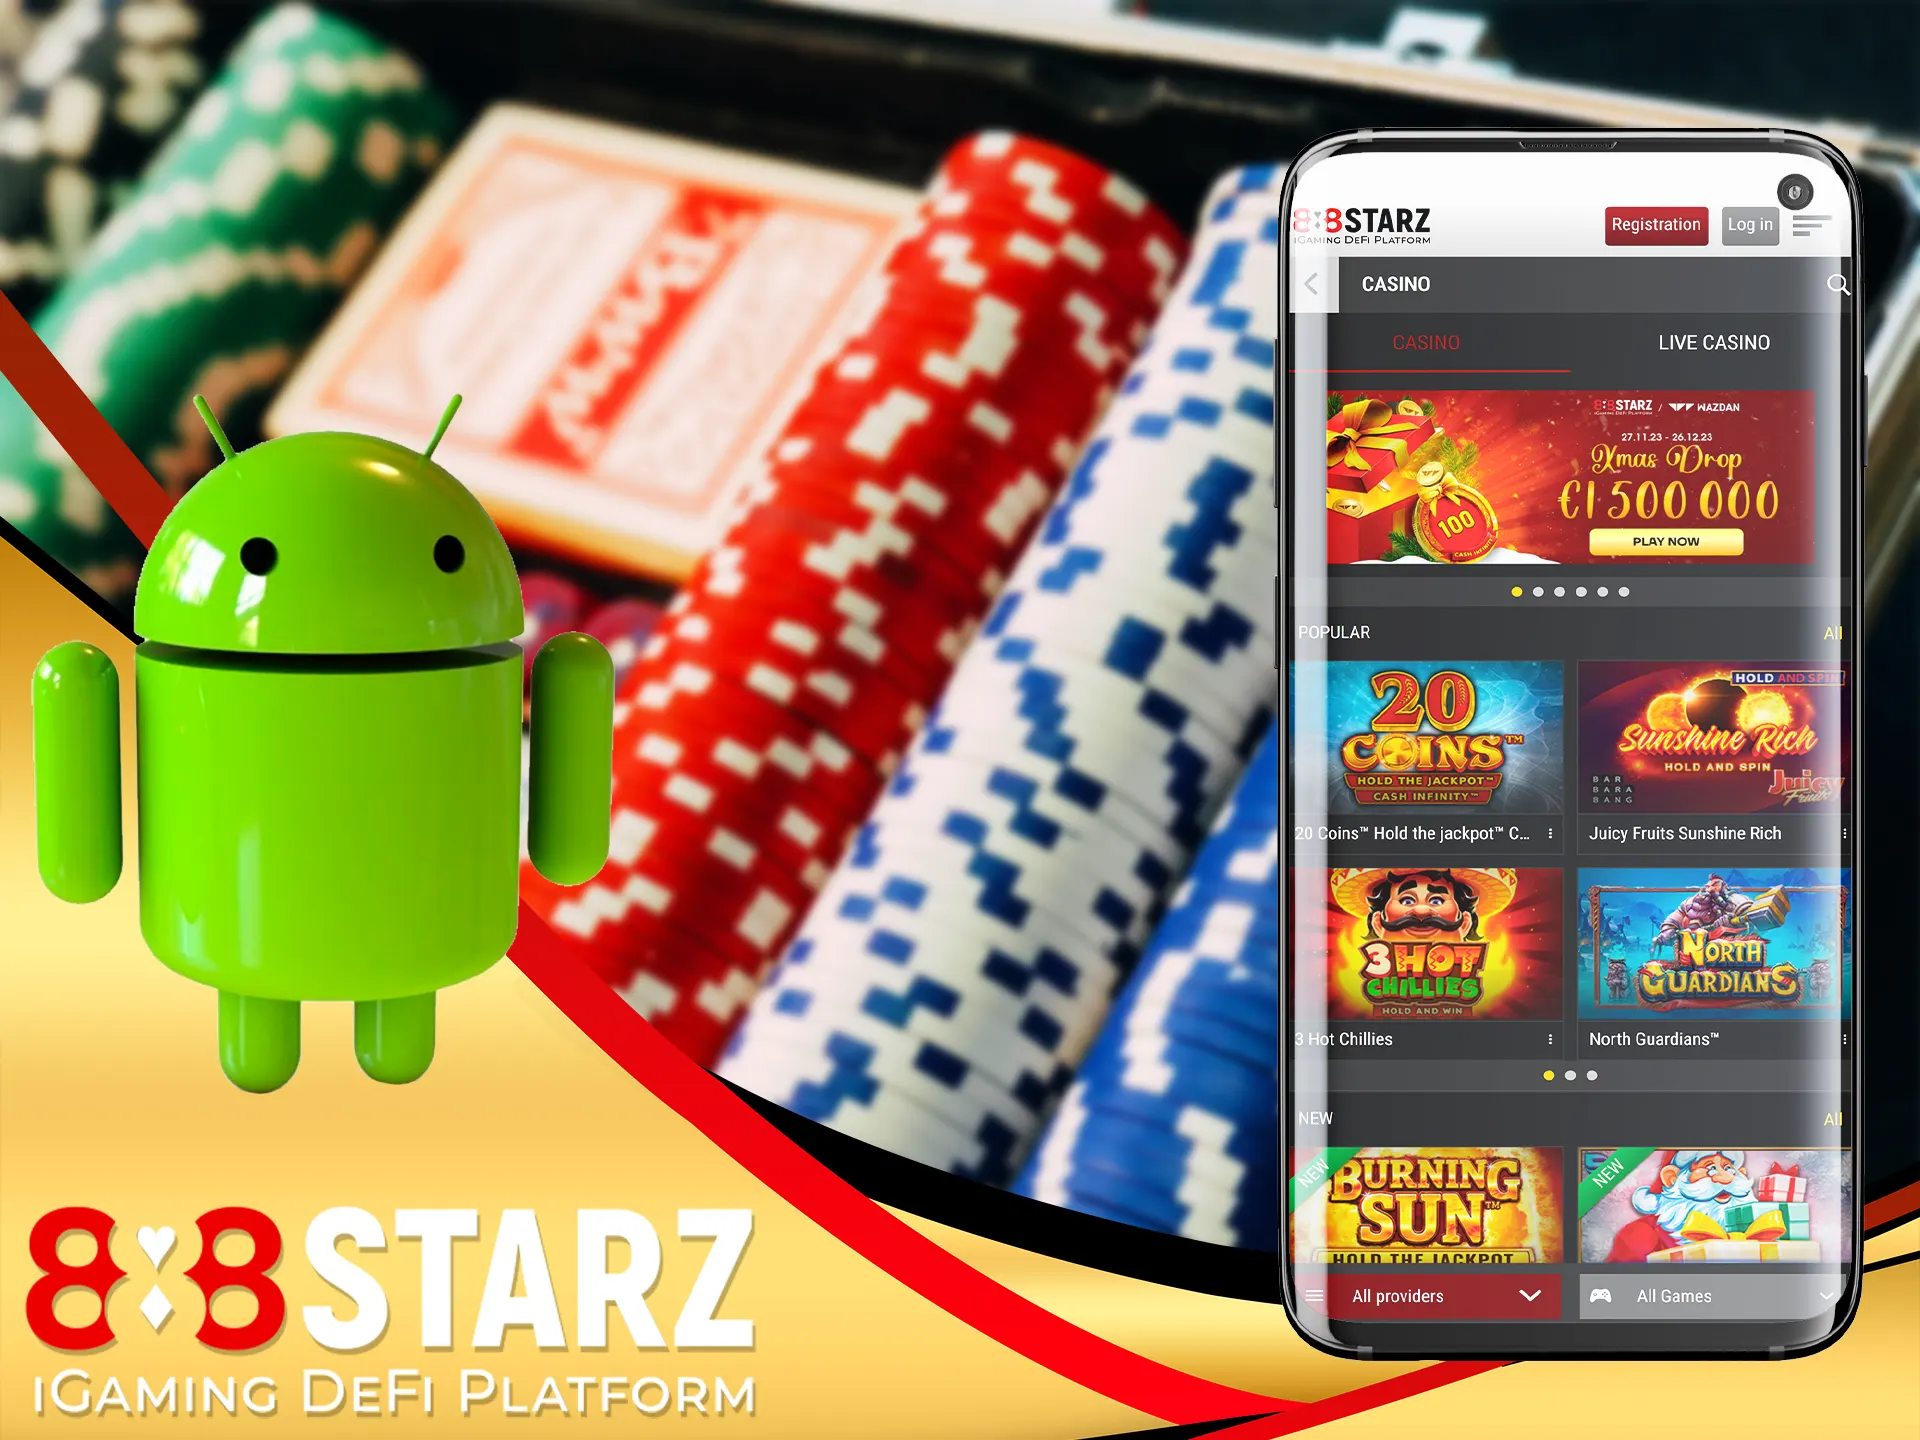 For ease of play, try a special application 888starz for this operating system, it has a similar interface to the site.